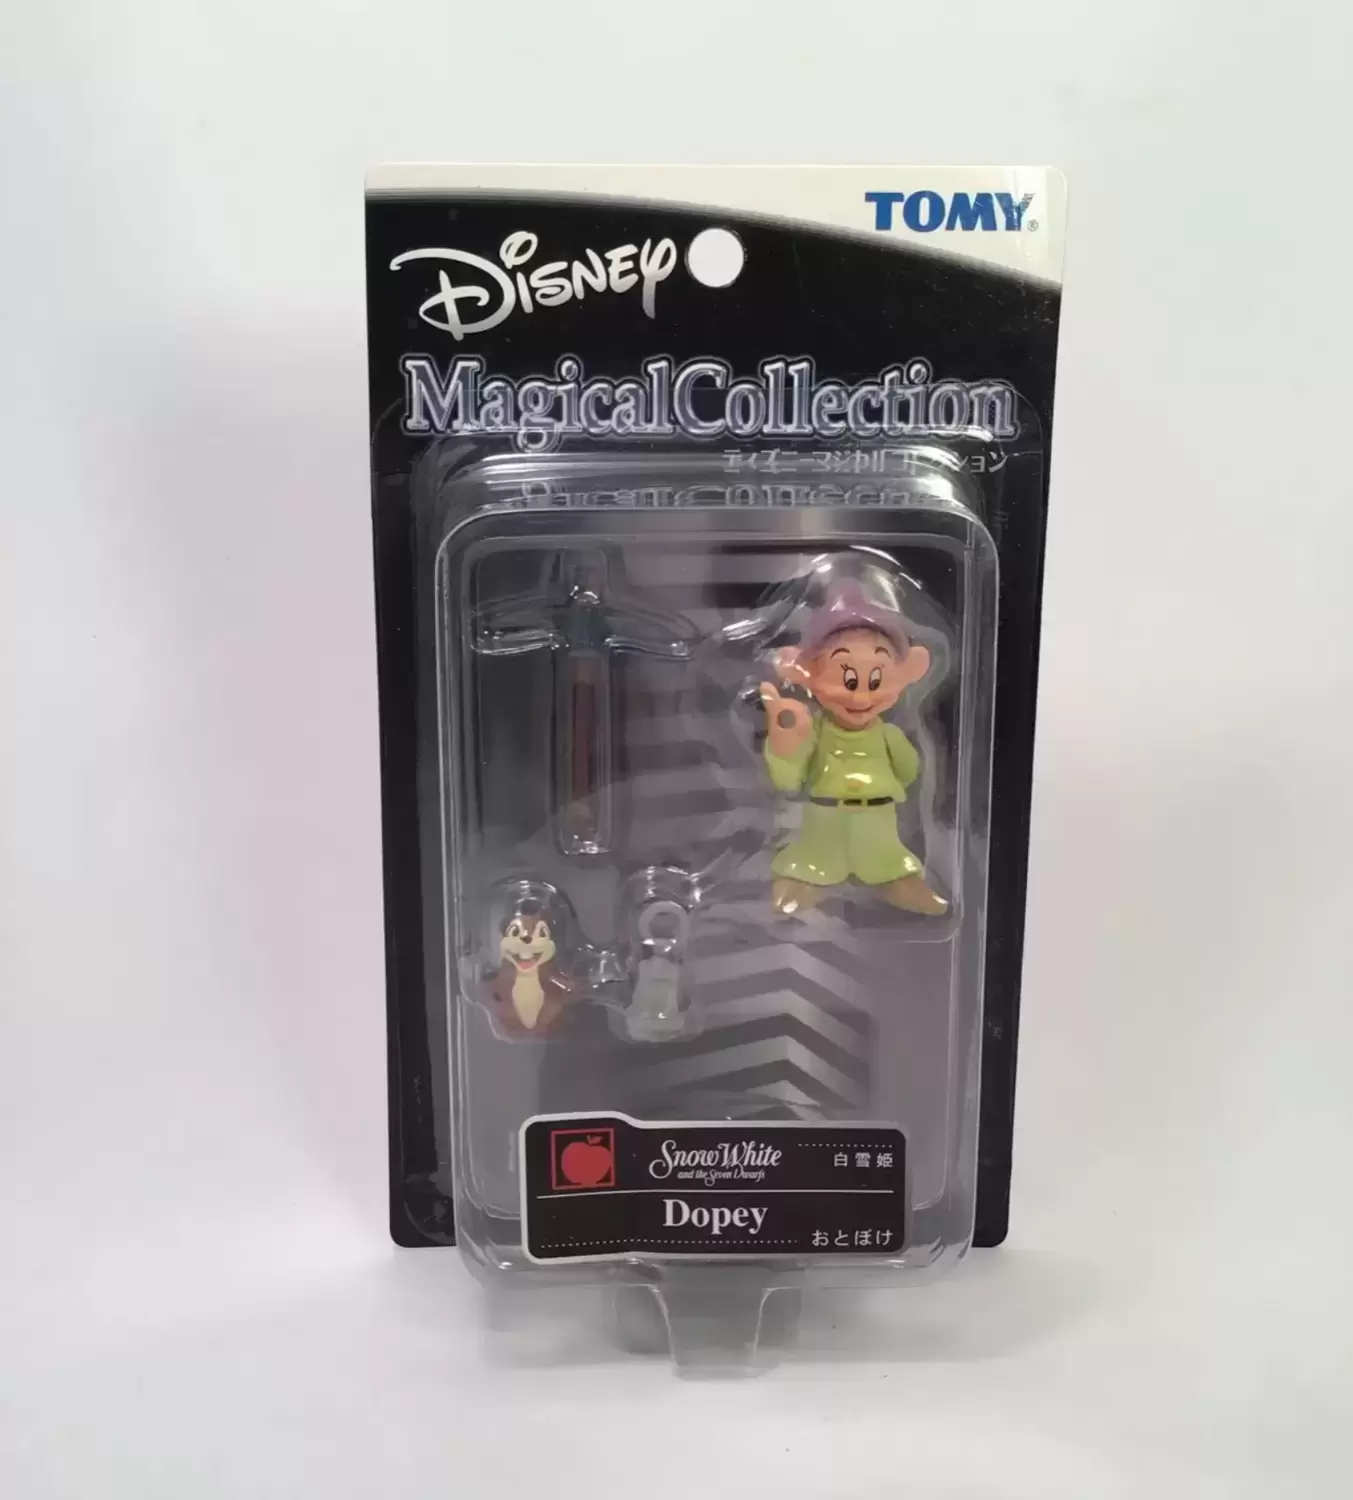 Magical Collection (TOMY) - Dopey